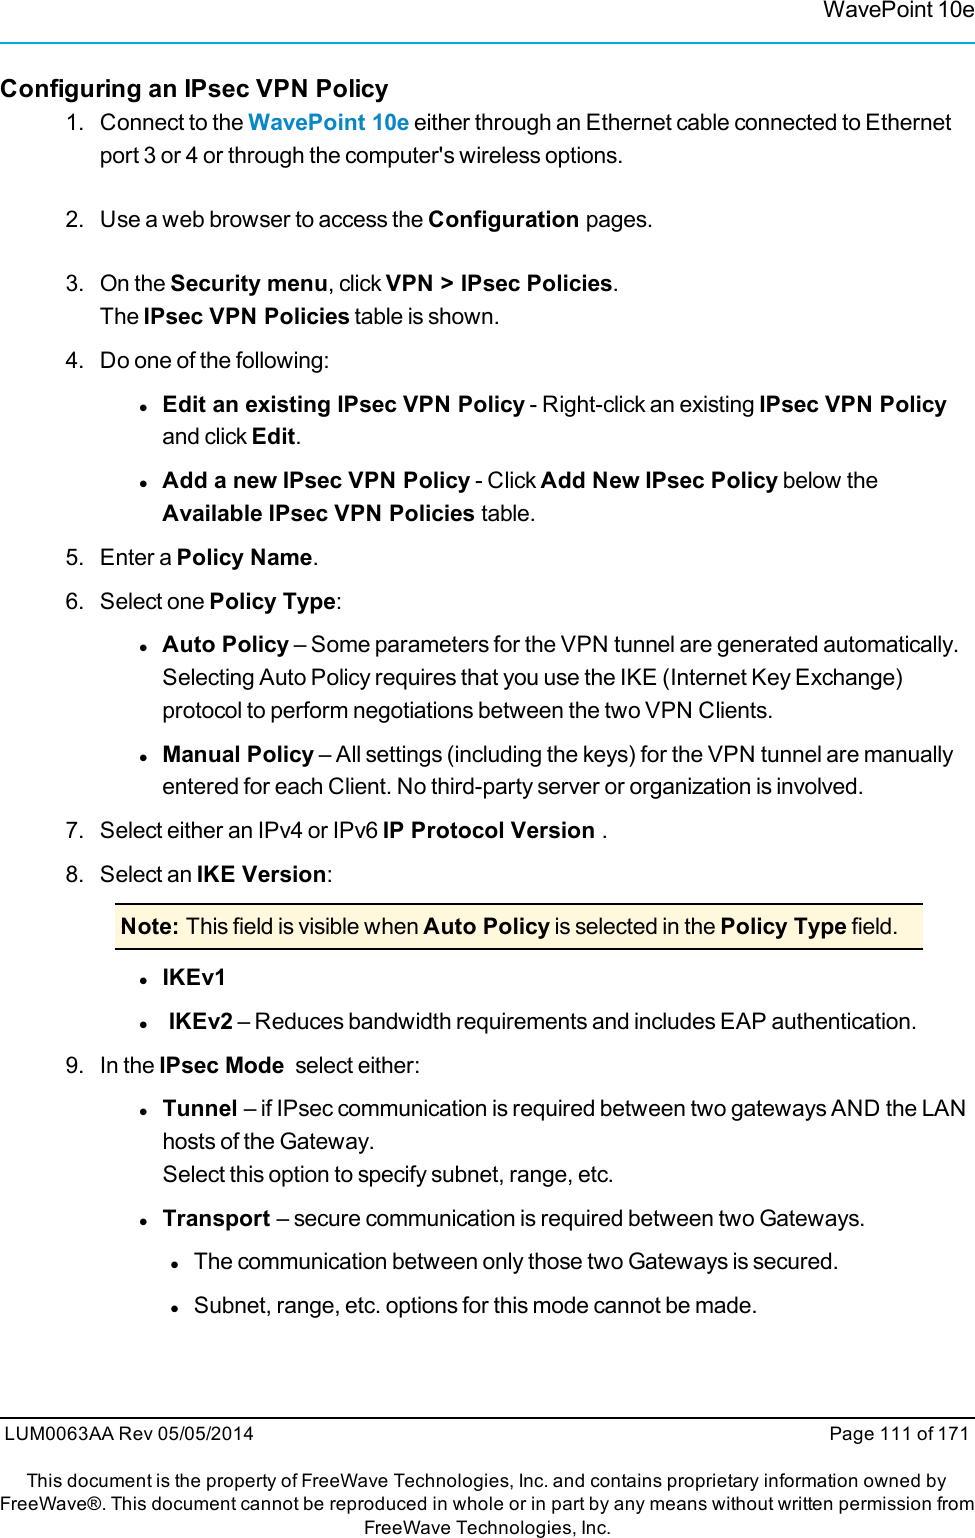 WavePoint 10eConfiguring an IPsec VPN Policy1. Connect to the WavePoint 10e either through an Ethernet cable connected to Ethernetport 3 or 4 or through the computer&apos;s wireless options.2. Use a web browser to access the Configuration pages.3. On the Security menu, click VPN &gt; IPsec Policies.The IPsec VPN Policies table is shown.4. Do one of the following:lEdit an existing IPsec VPN Policy - Right-click an existing IPsec VPN Policyand click Edit.lAdd a new IPsec VPN Policy - Click Add New IPsec Policy below theAvailable IPsec VPN Policies table.5. Enter a Policy Name.6. Select one Policy Type:lAuto Policy – Some parameters for the VPN tunnel are generated automatically.Selecting Auto Policy requires that you use the IKE (Internet Key Exchange)protocol to perform negotiations between the two VPN Clients.lManual Policy – All settings (including the keys) for the VPN tunnel are manuallyentered for each Client. No third-party server or organization is involved.7. Select either an IPv4 or IPv6 IP Protocol Version .8. Select an IKE Version:Note: This field is visible when Auto Policy is selected in the Policy Type field.lIKEv1lIKEv2 – Reduces bandwidth requirements and includes EAP authentication.9. In the IPsec Mode select either:lTunnel – if IPsec communication is required between two gateways AND the LANhosts of the Gateway.Select this option to specify subnet, range, etc.lTransport – secure communication is required between two Gateways.lThe communication between only those two Gateways is secured.lSubnet, range, etc. options for this mode cannot be made.LUM0063AA Rev 05/05/2014 Page 111 of 171This document is the property of FreeWave Technologies, Inc. and contains proprietary information owned byFreeWave®. This document cannot be reproduced in whole or in part by any means without written permission fromFreeWave Technologies, Inc.